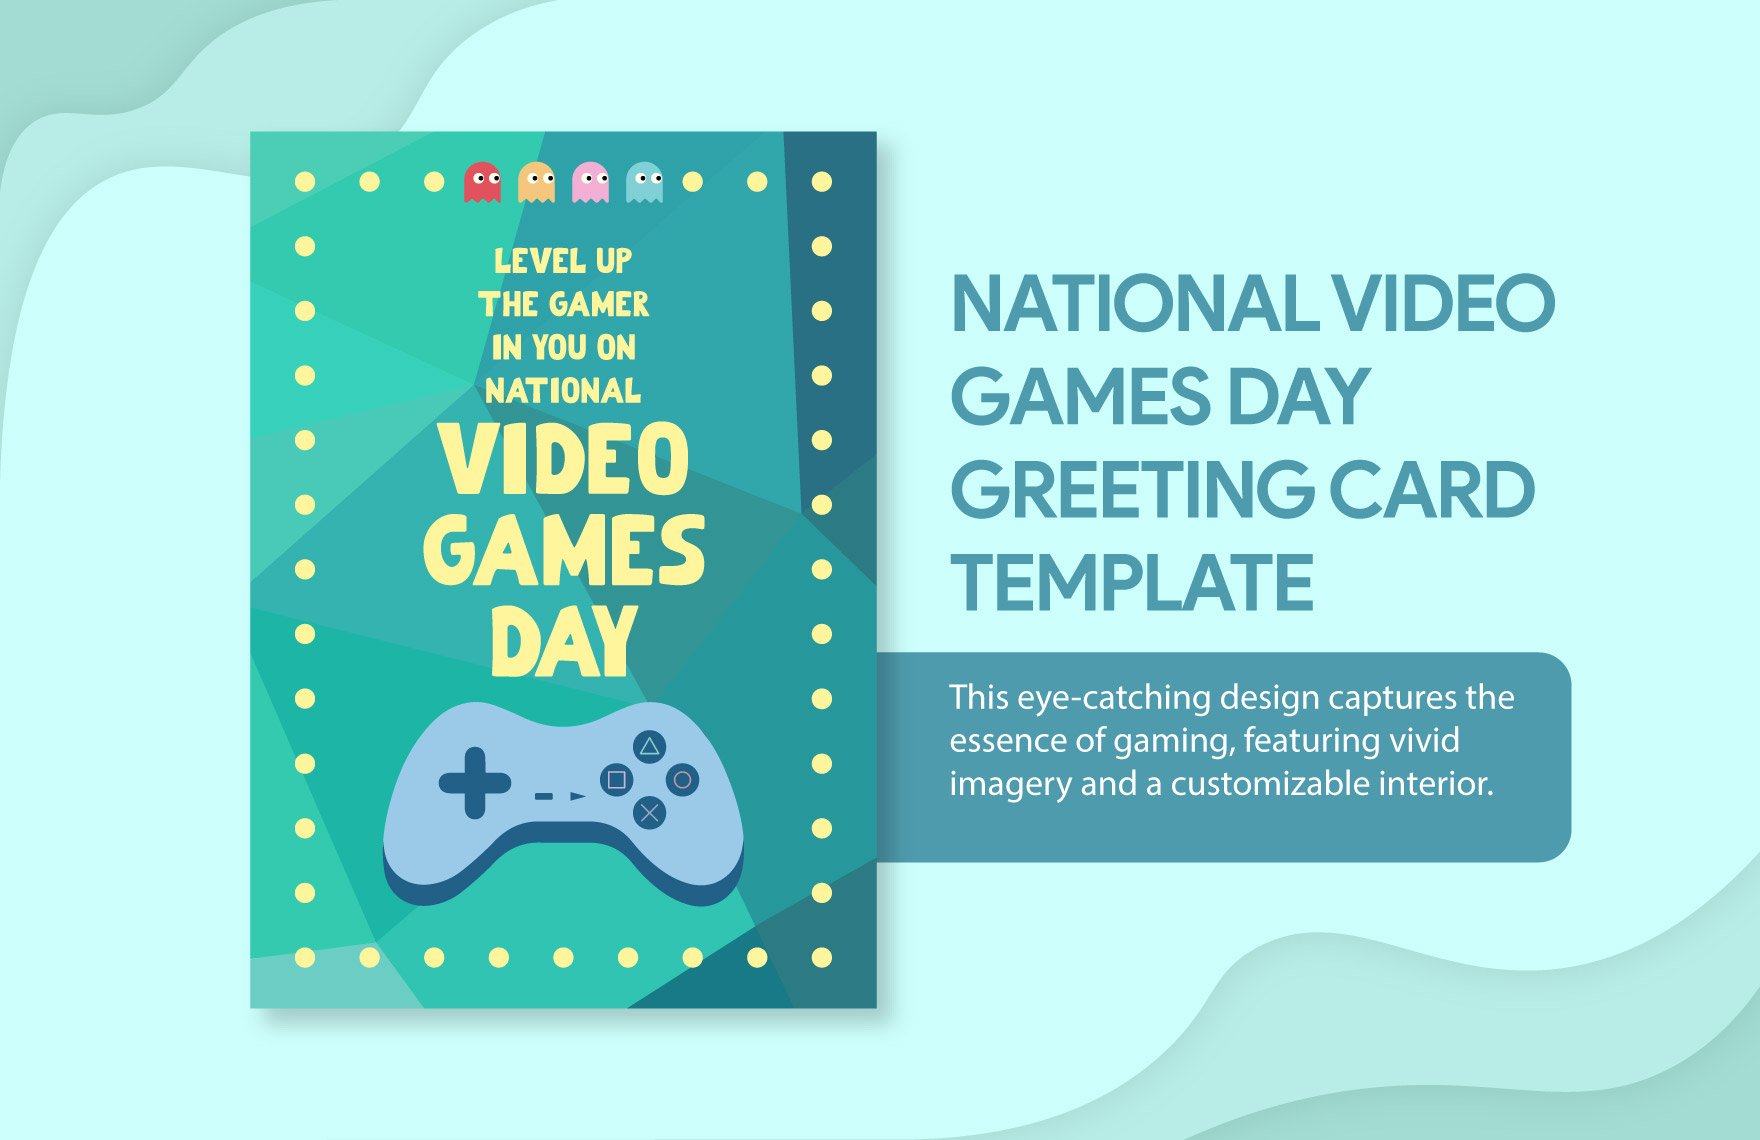 Free National Video Games Day Greeting Card Template in Illustrator, PSD, PNG